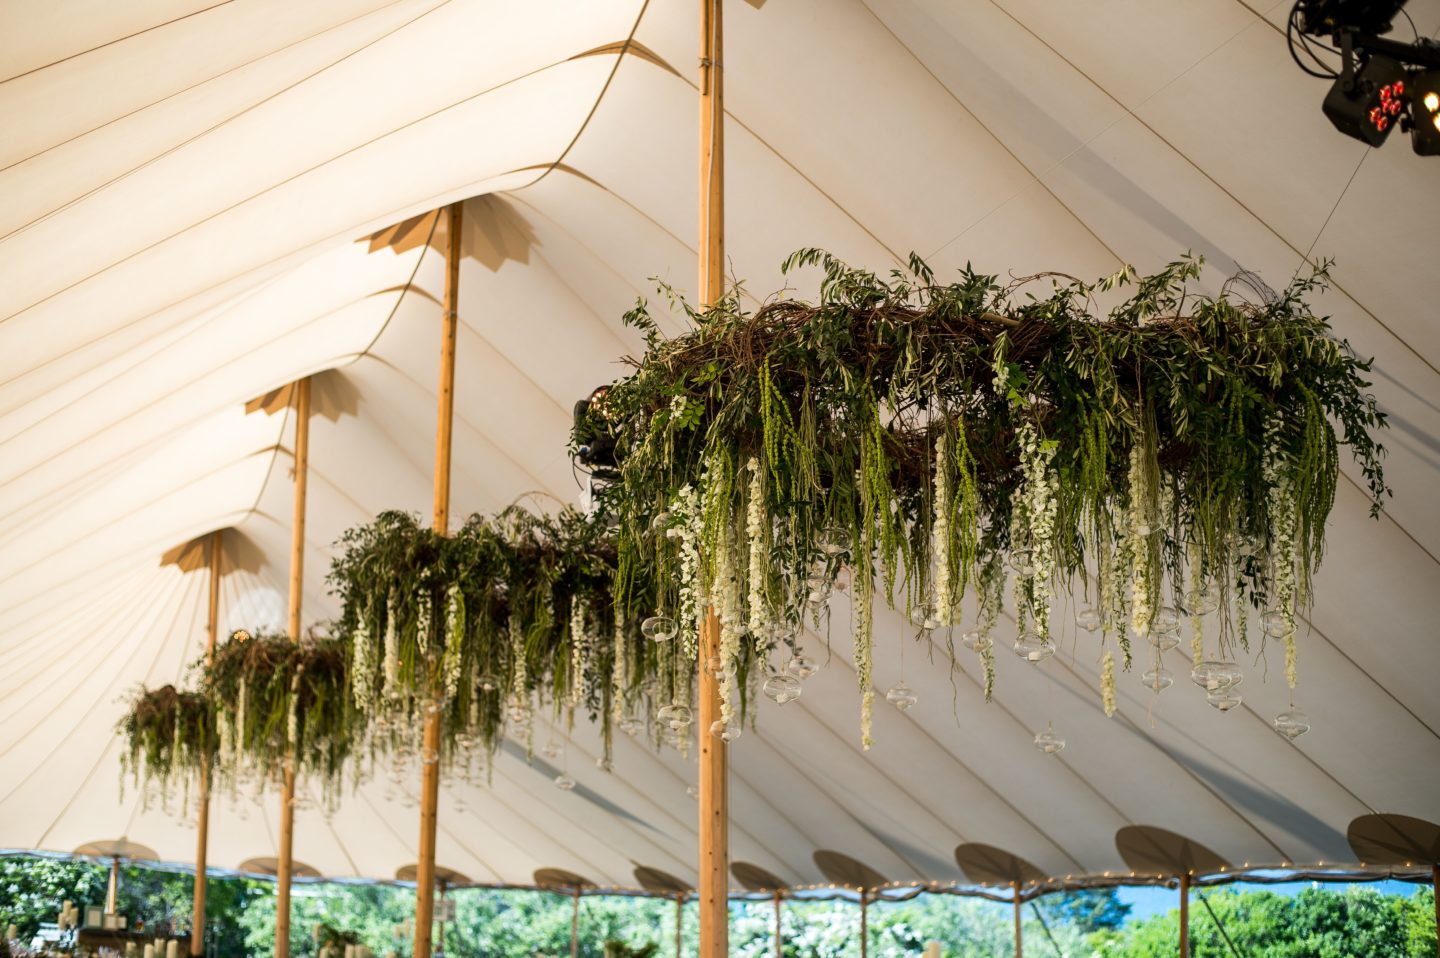 sperry sailcloth tent interior with hanging florals